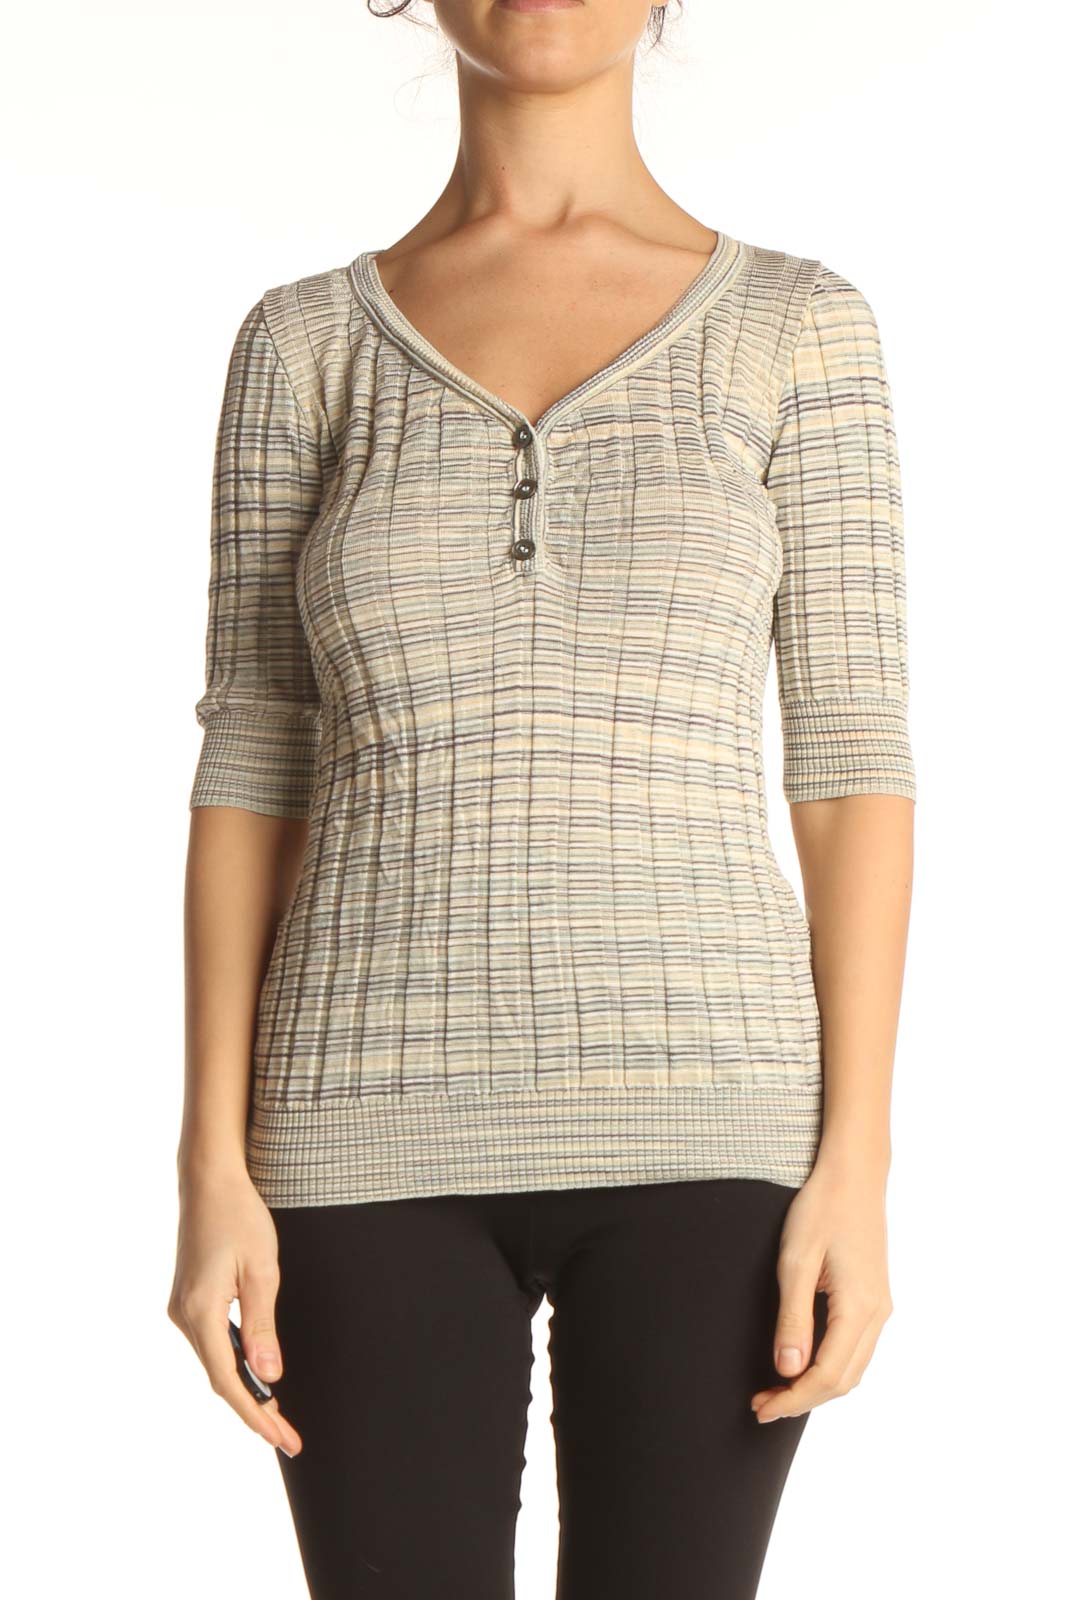 Beige Striped Casual Top Front